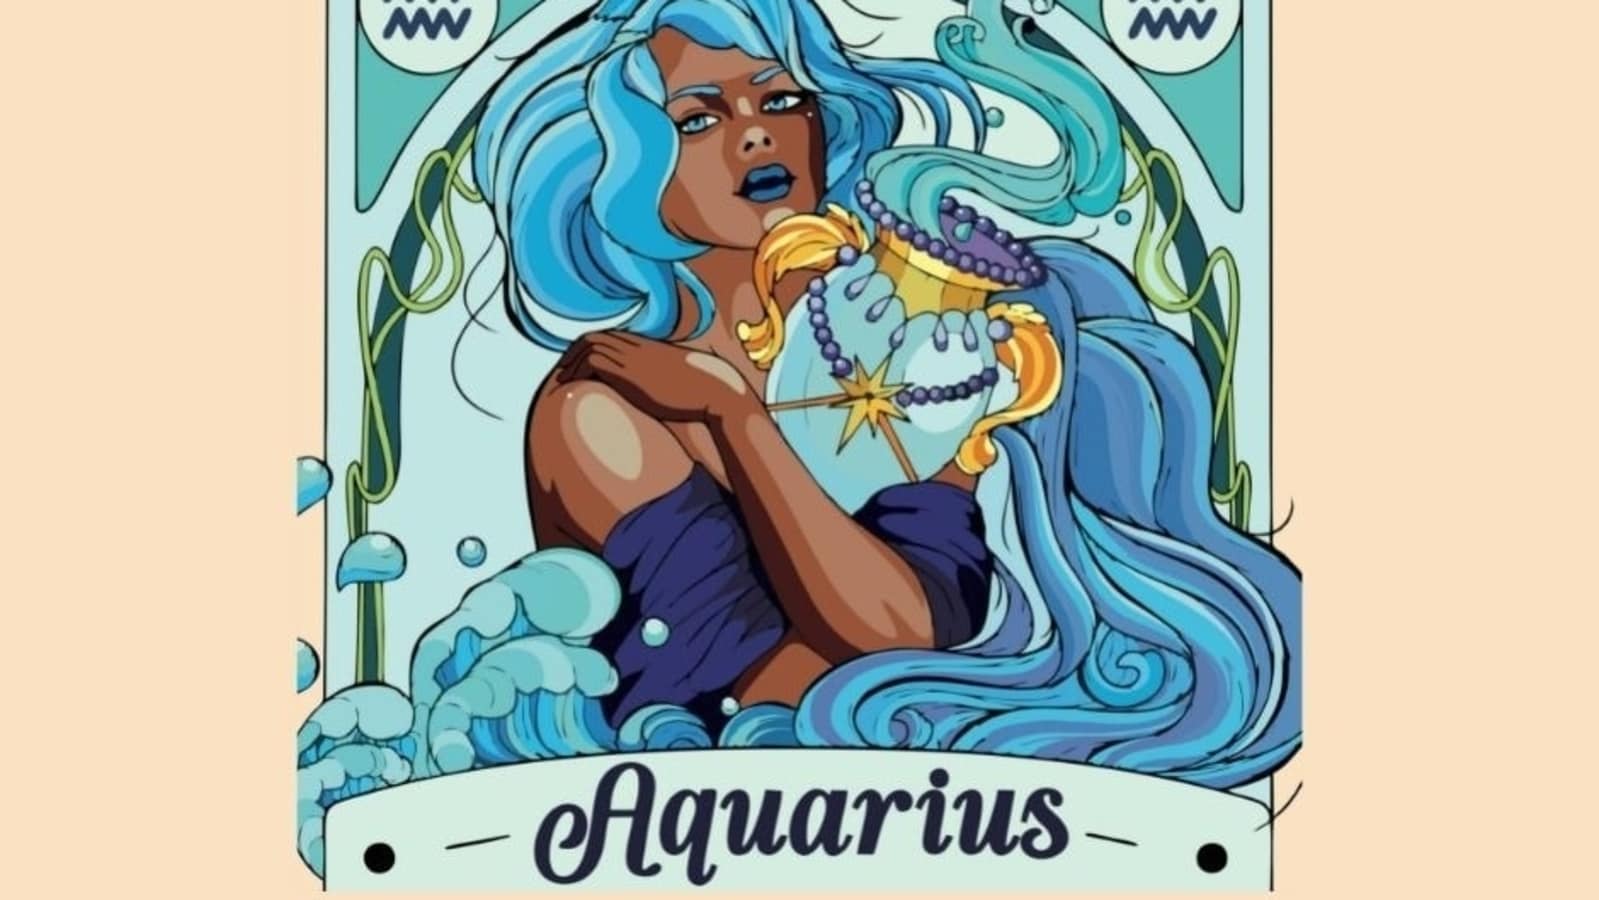 Aquarius Horoscope Today: Daily predictions for June 27,'22 states, good results